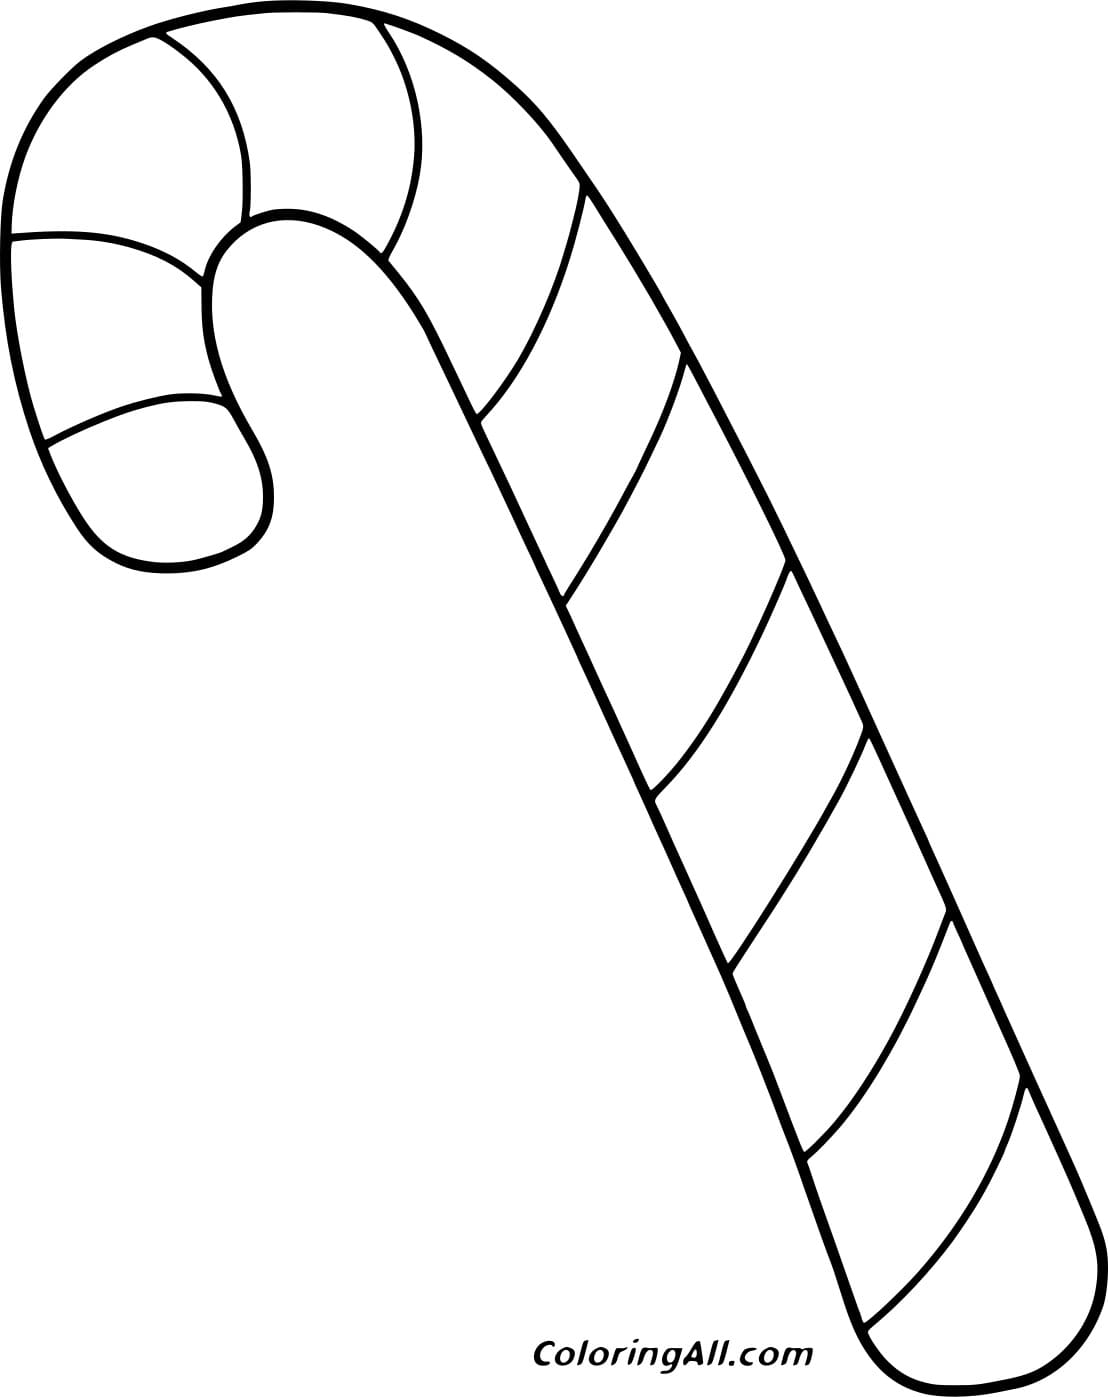 Simple Vertical Candy Cane For Kids Coloring Page